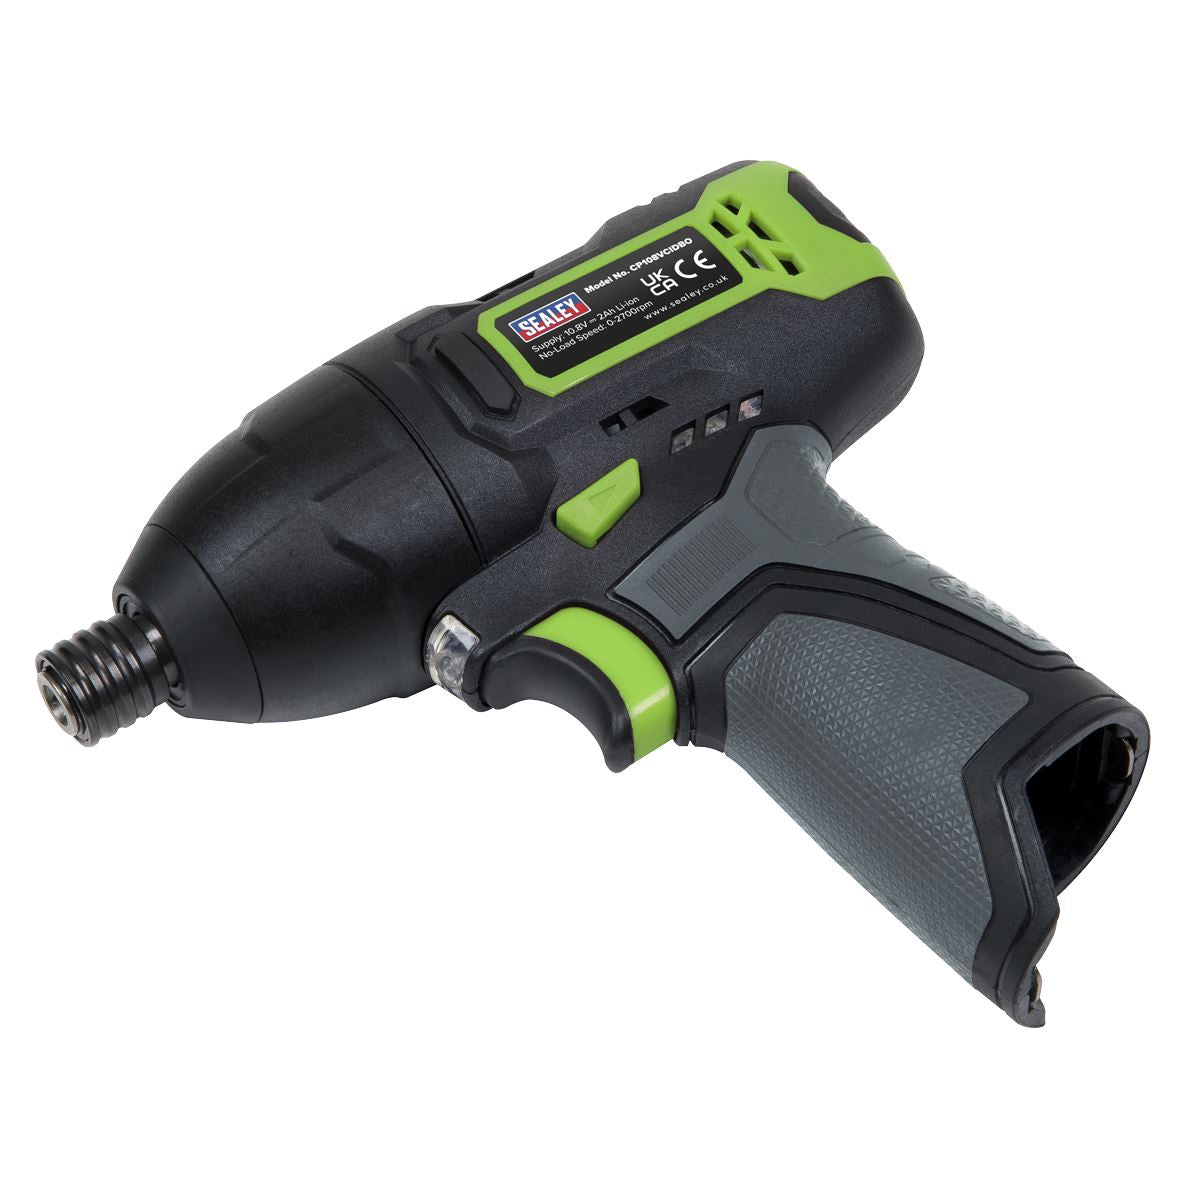 Sealey Cordless Impact Driver 1/4"Hex Drive 10.8V SV10.8 Series - Body Only